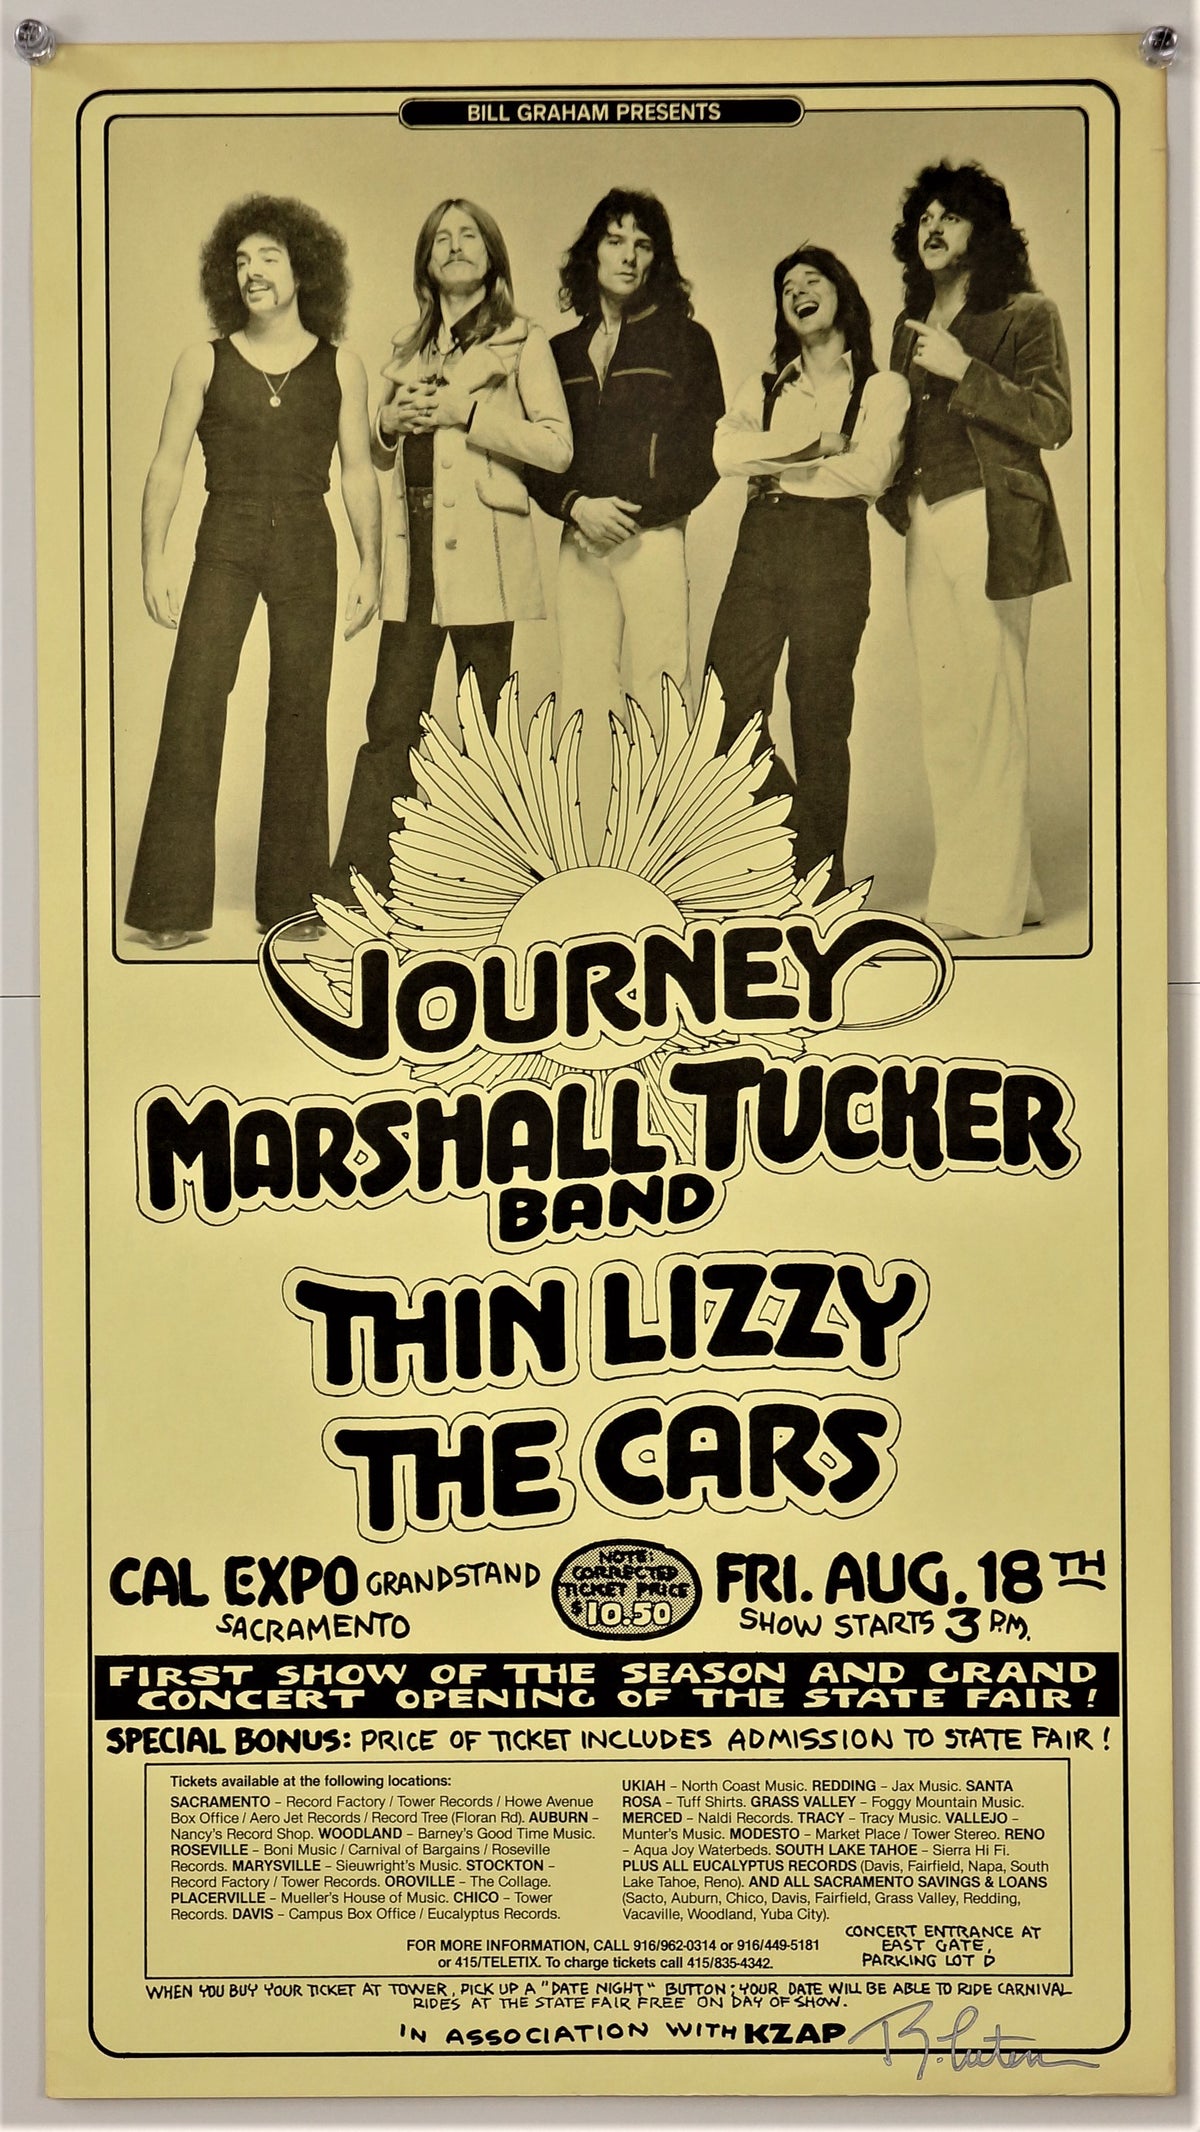 Journey at Cal Expo - Authentic Vintage Poster